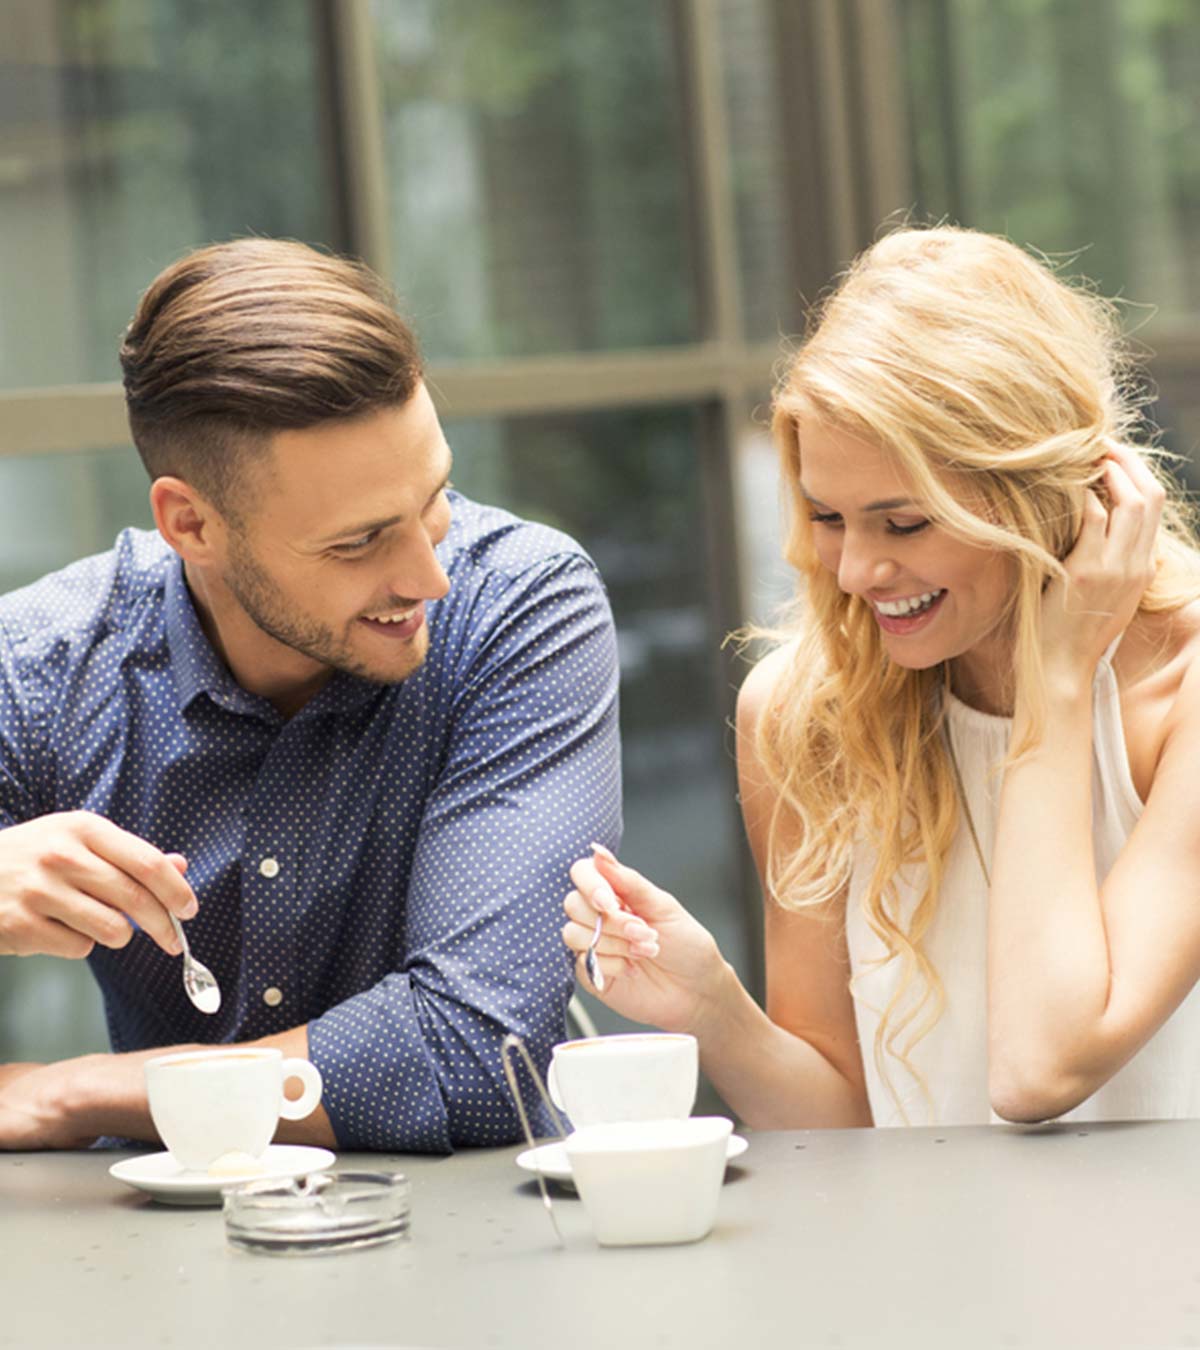 35 Things To Talk About With A Girl For A Great Conversation